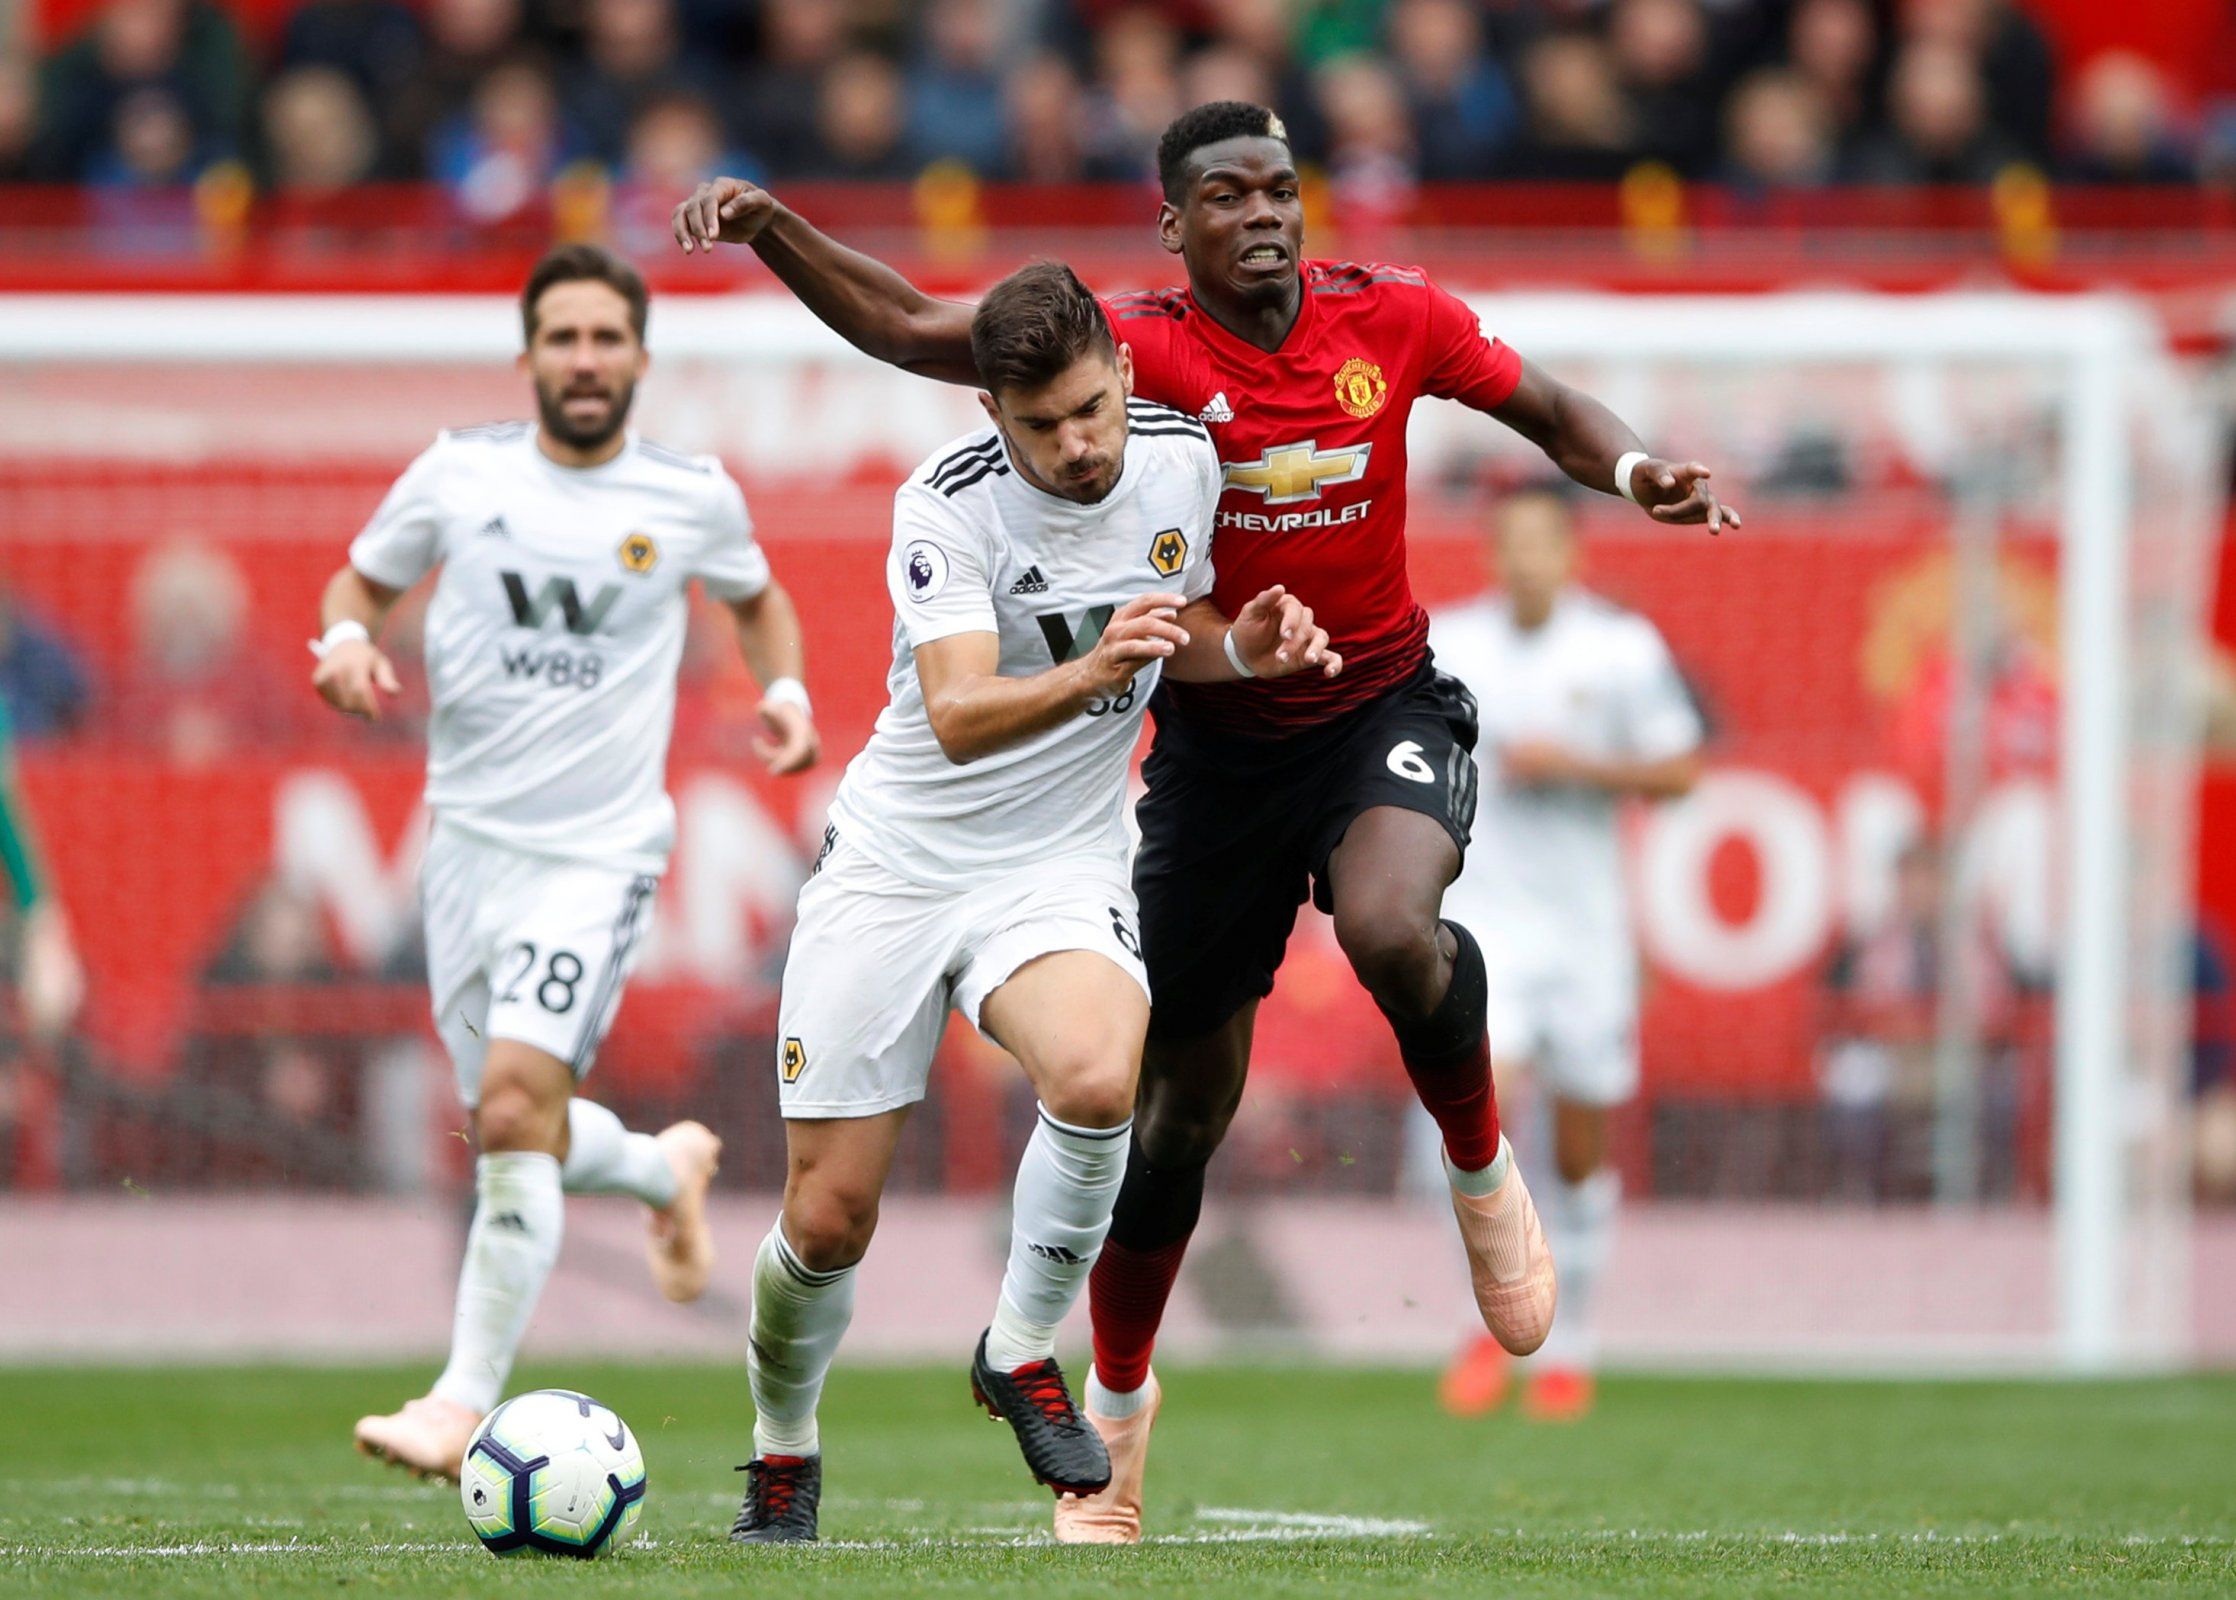 Wolverhampton Wanderers' Ruben Neves slams Manchester United's Paul Pogba to the side